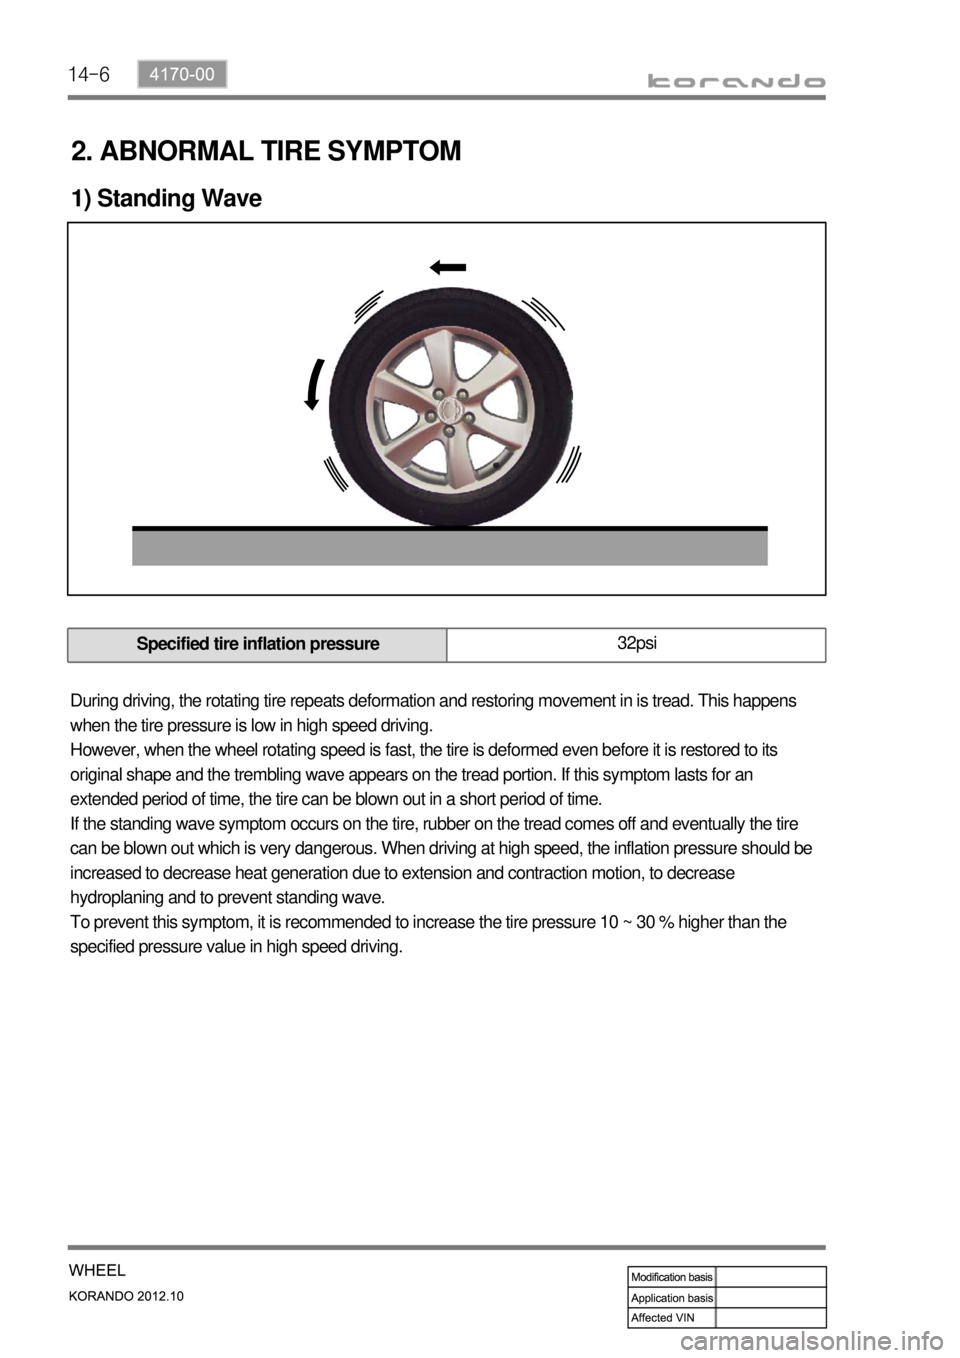 SSANGYONG KORANDO 2012  Service Manual 14-6
During driving, the rotating tire repeats deformation and restoring movement in is tread. This happens 
when the tire pressure is low in high speed driving. 
However, when the wheel rotating spee